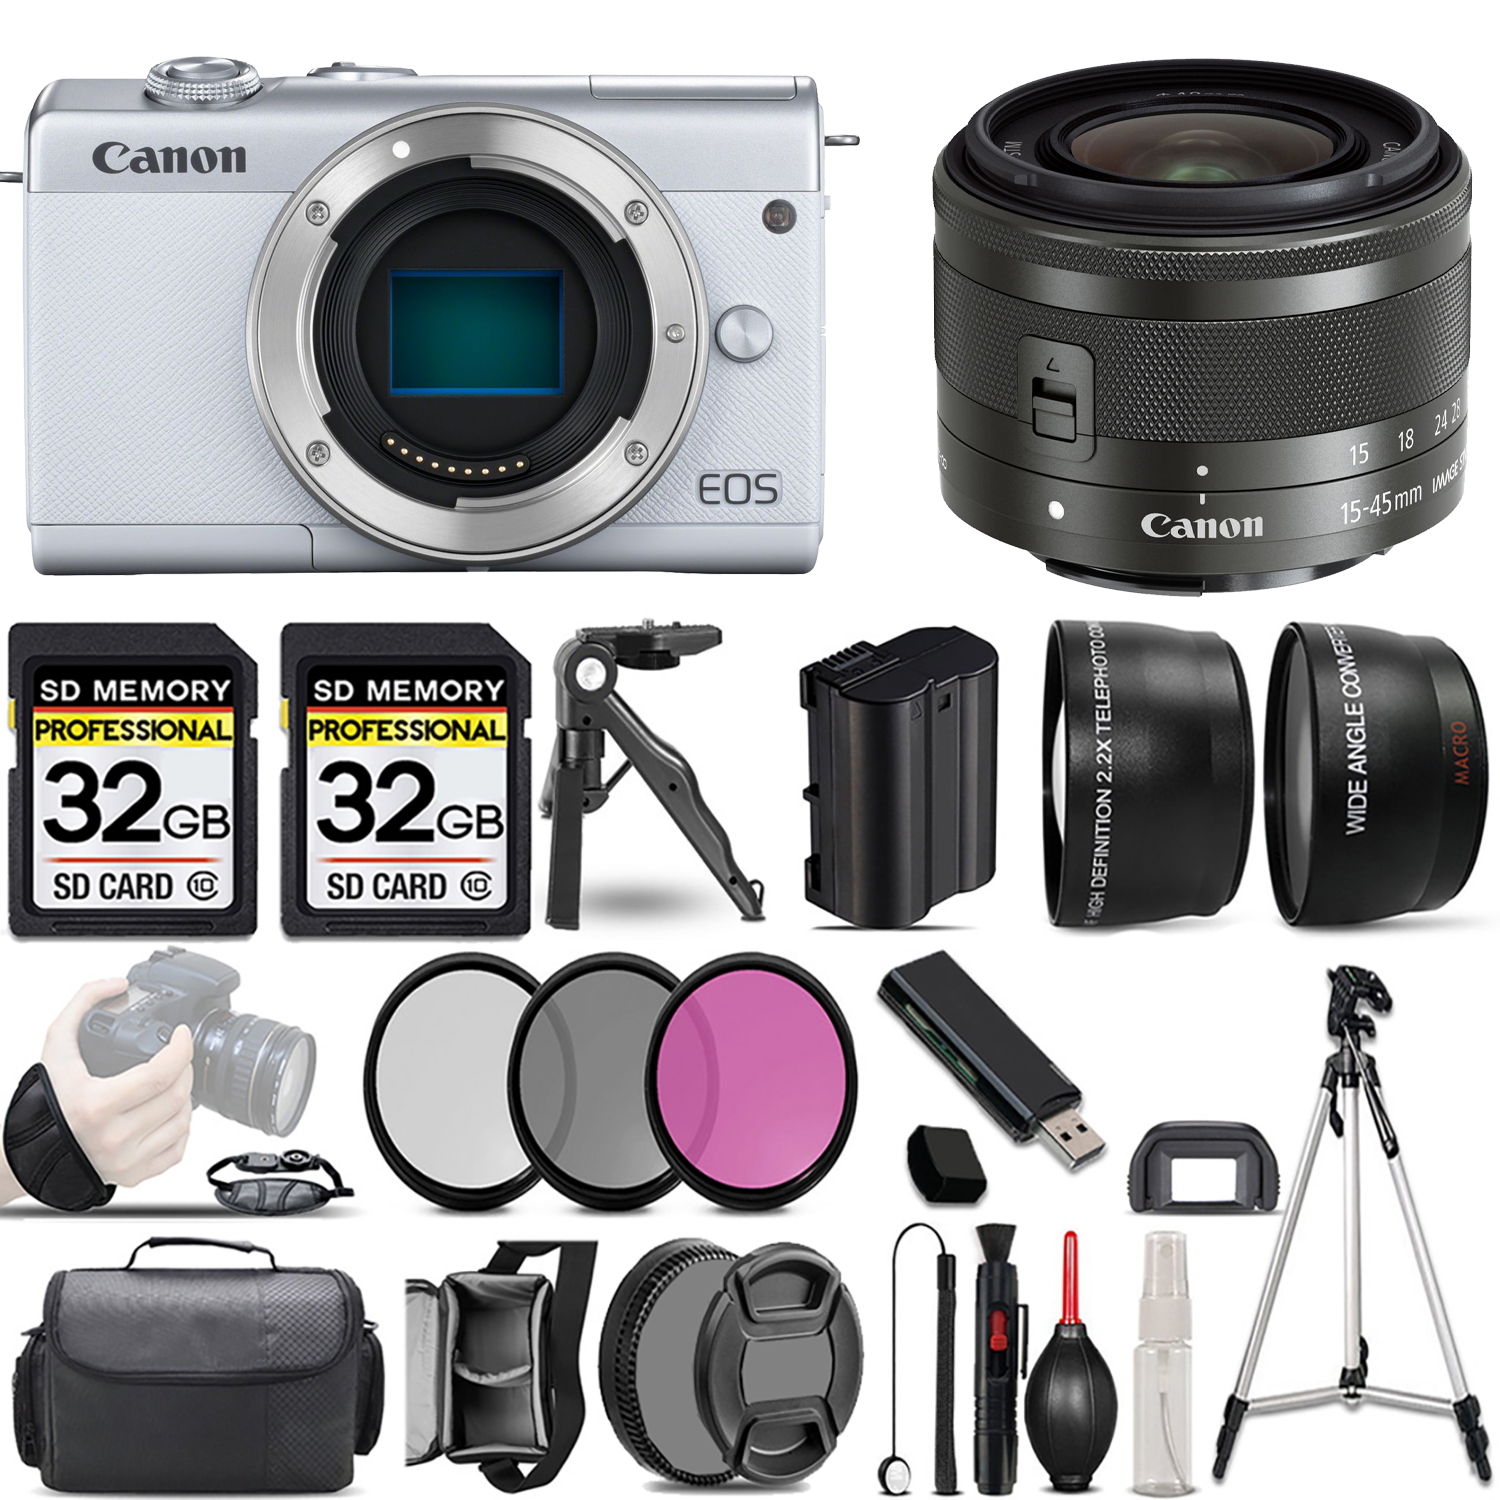 EOS M200  Camera (White) + 15-45mm IS STM Lens (Graphite) + 3 Piece Filter Set + 64GB *FREE SHIPPING*